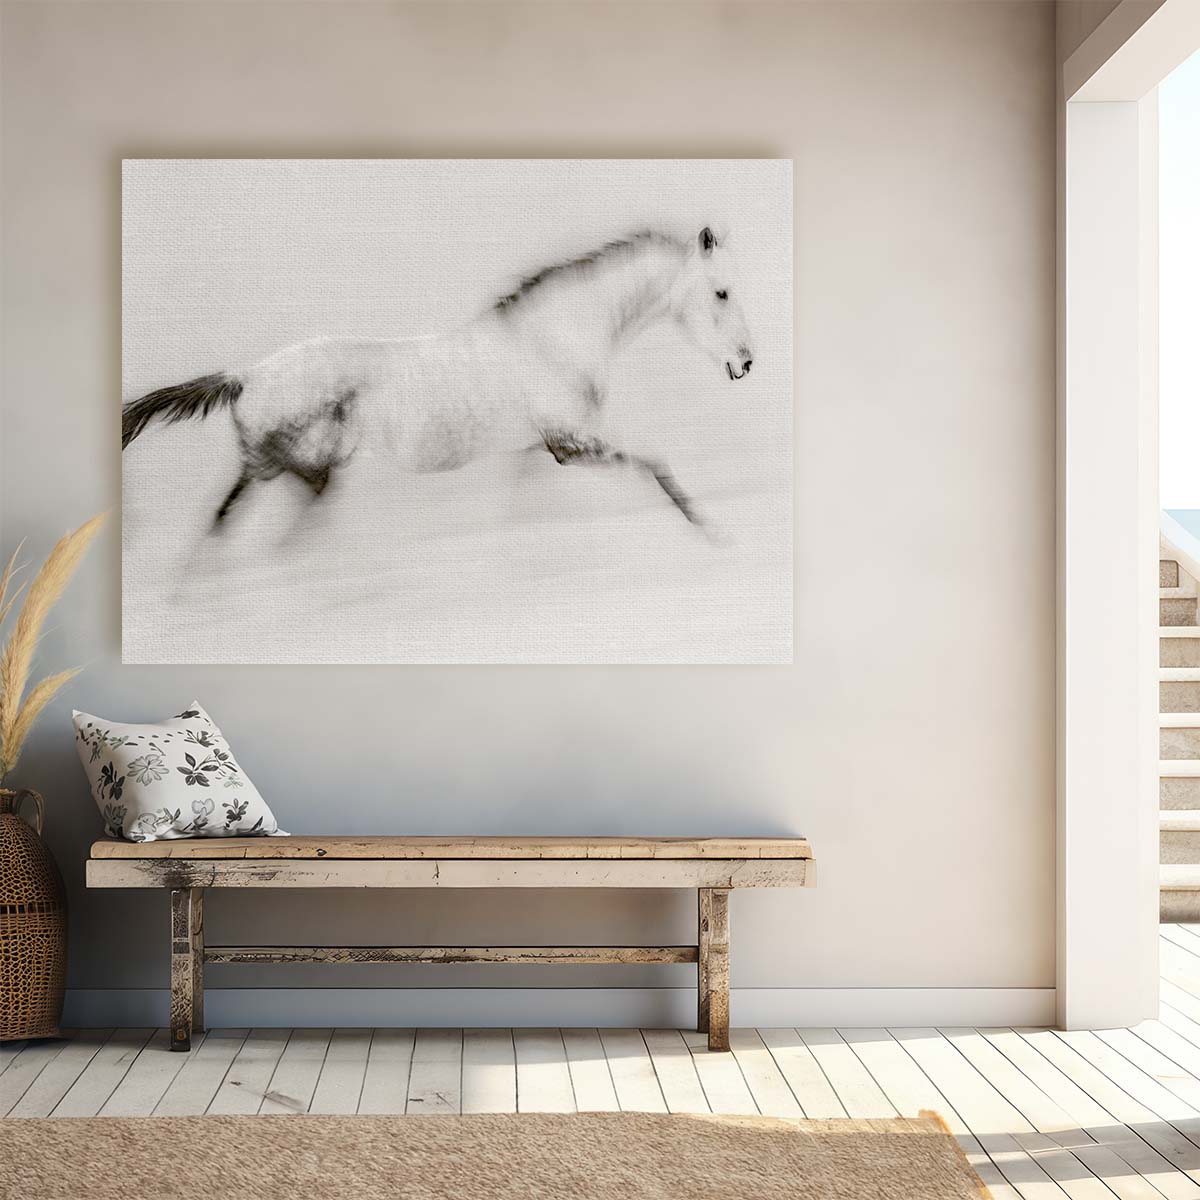 Camargue Stallion in Motion Abstract Equestrian Wall Art by Luxuriance Designs. Made in USA.